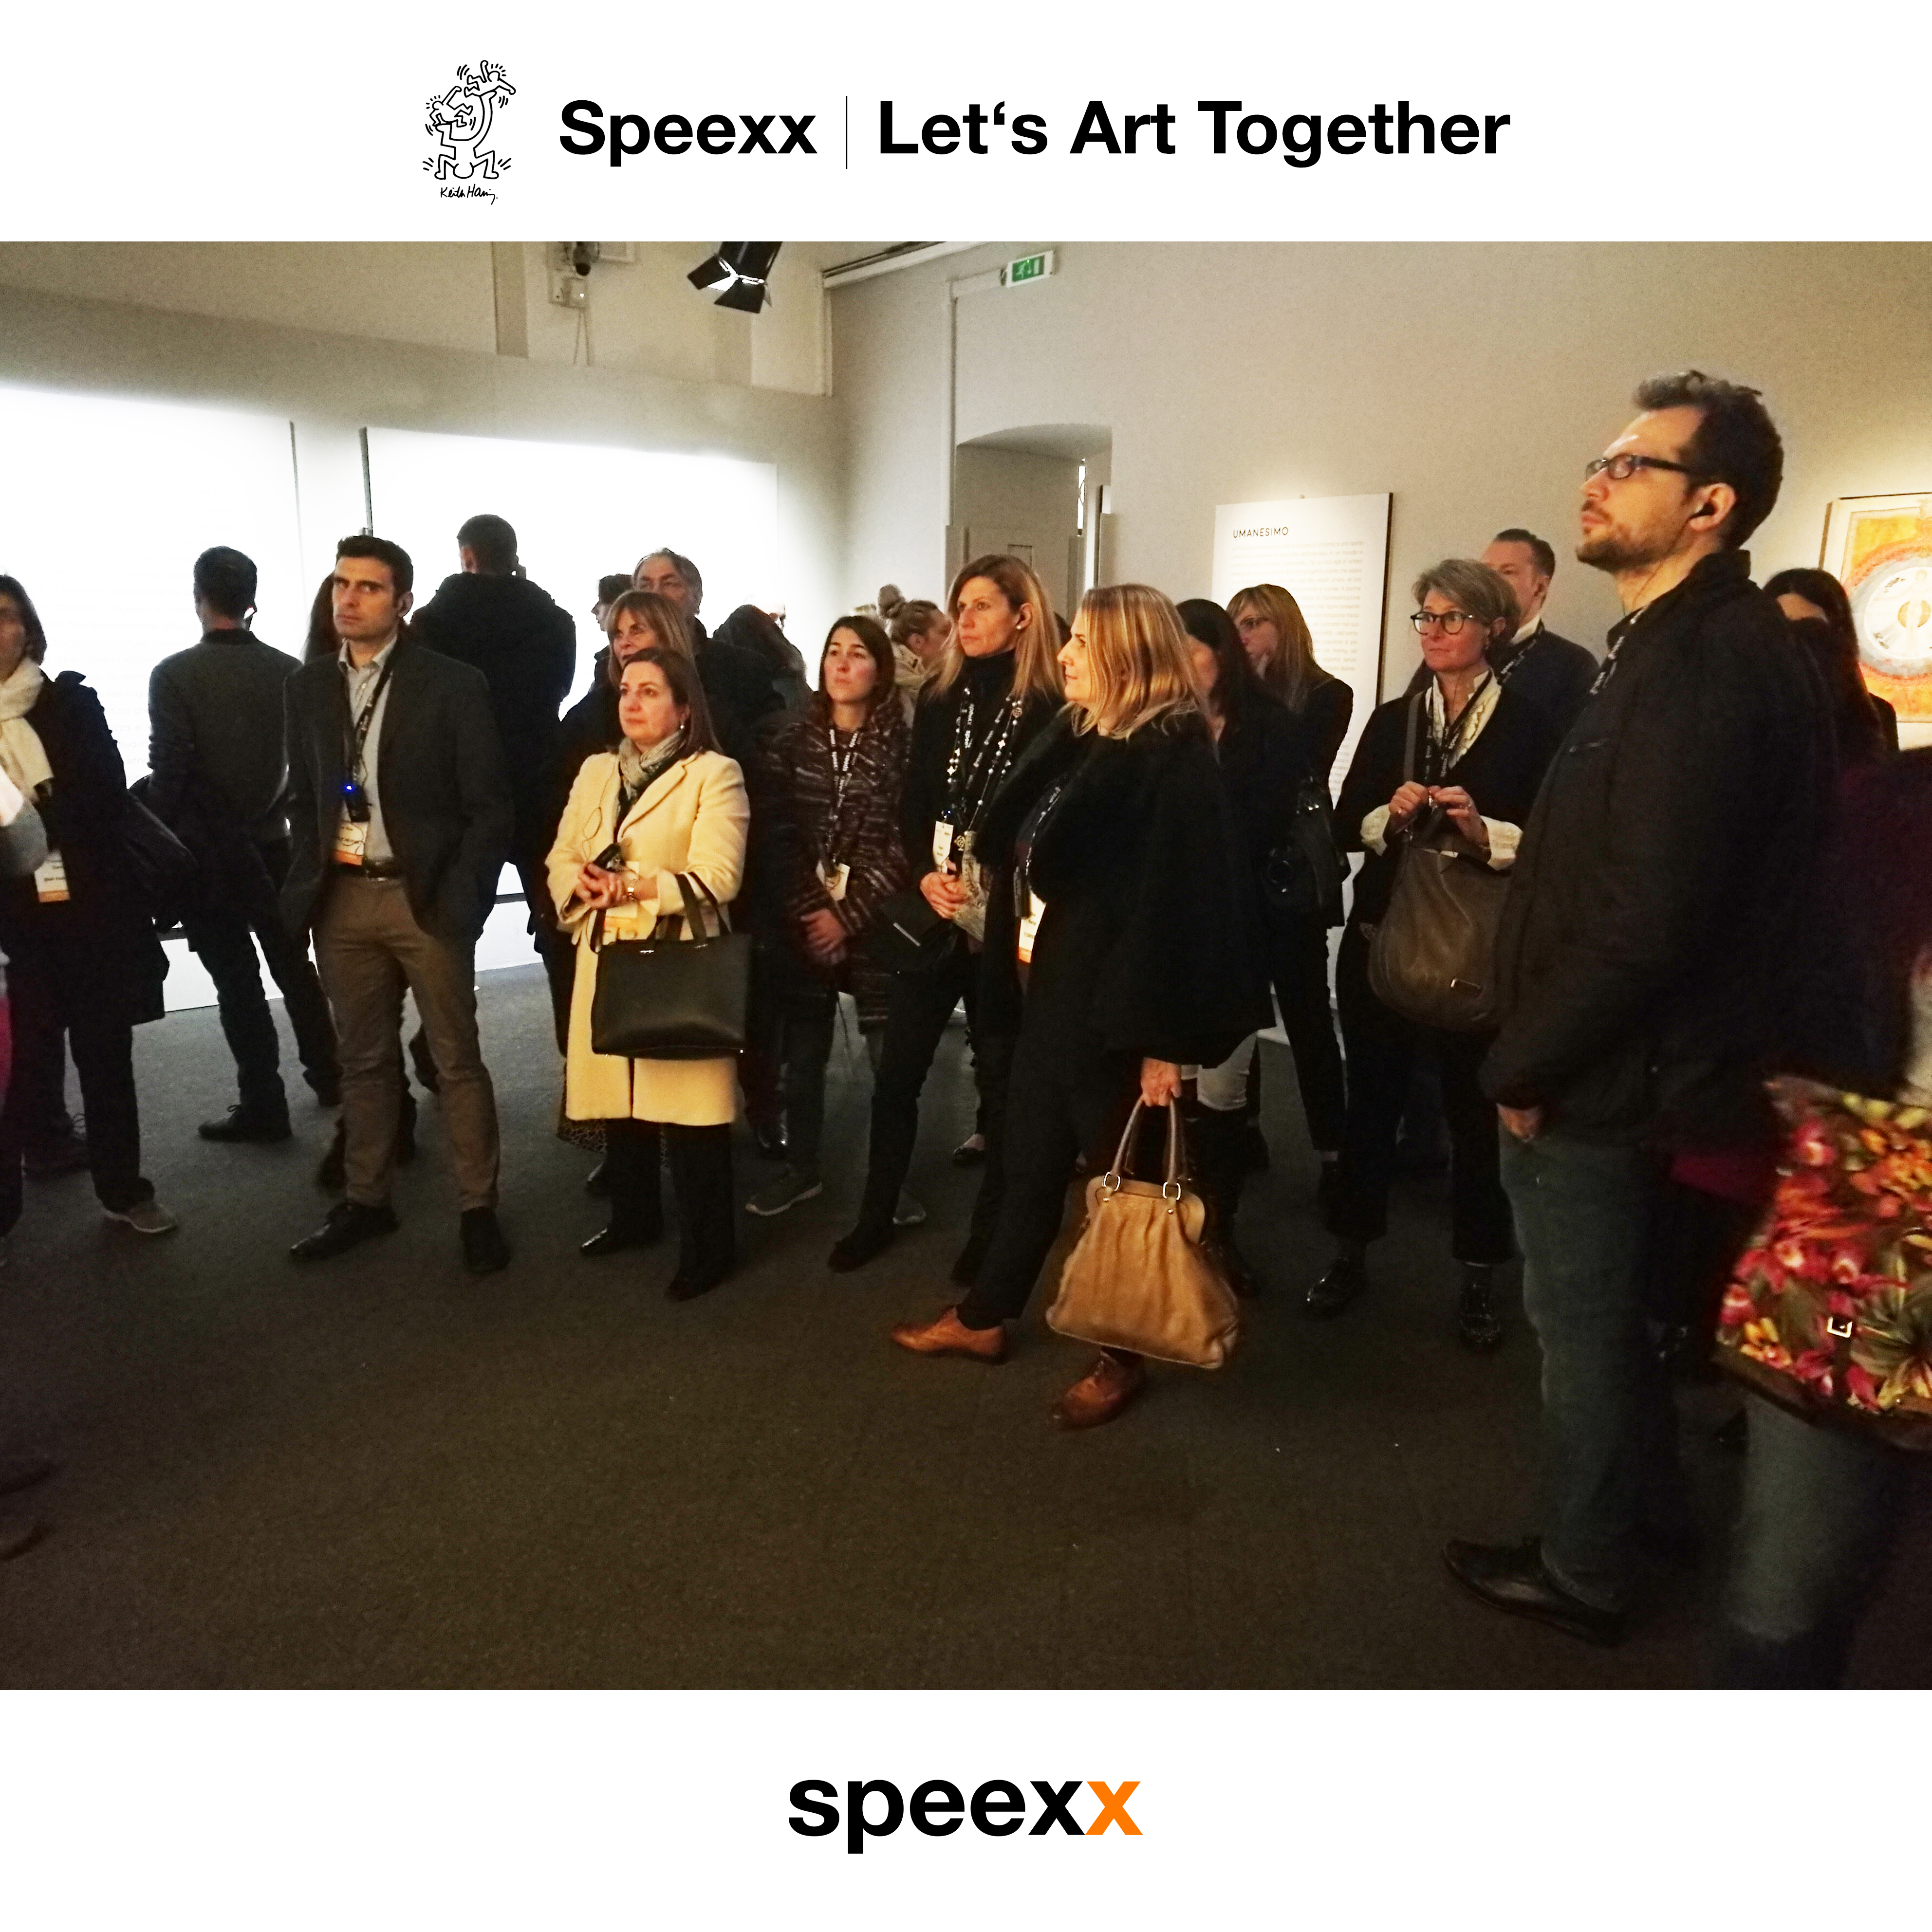 speexx let's art together -keith haring